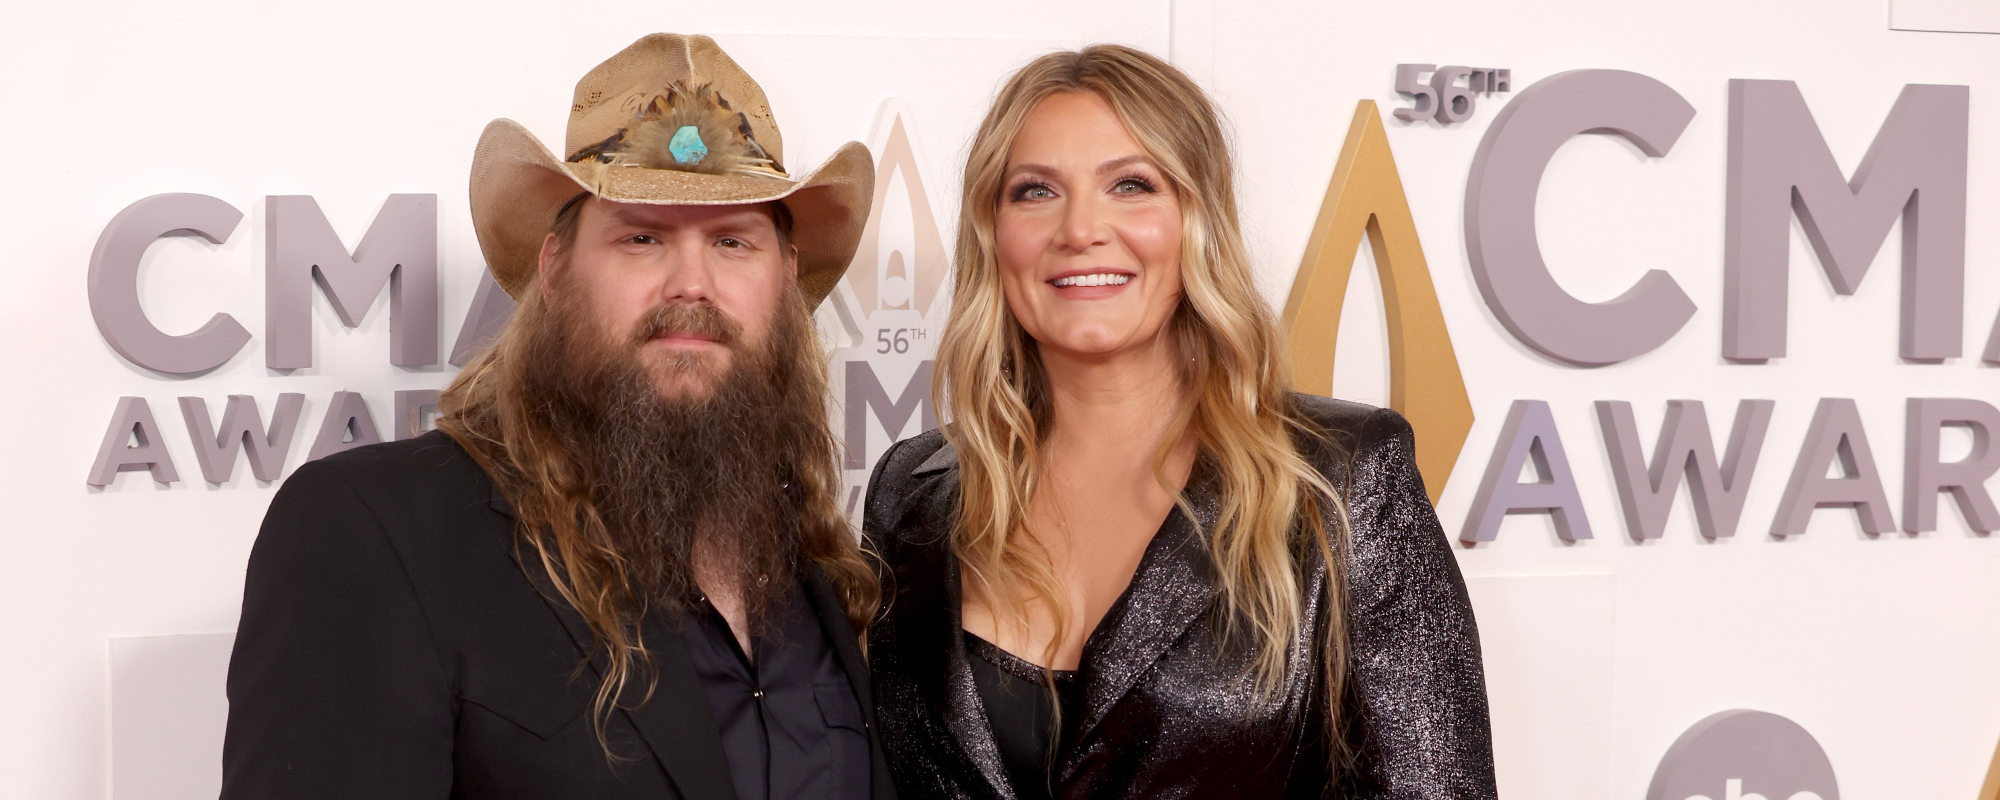 Chris Stapleton Talks Writing Songs on a Perfect Date Night With Wife: “There’s an Electricity to It”